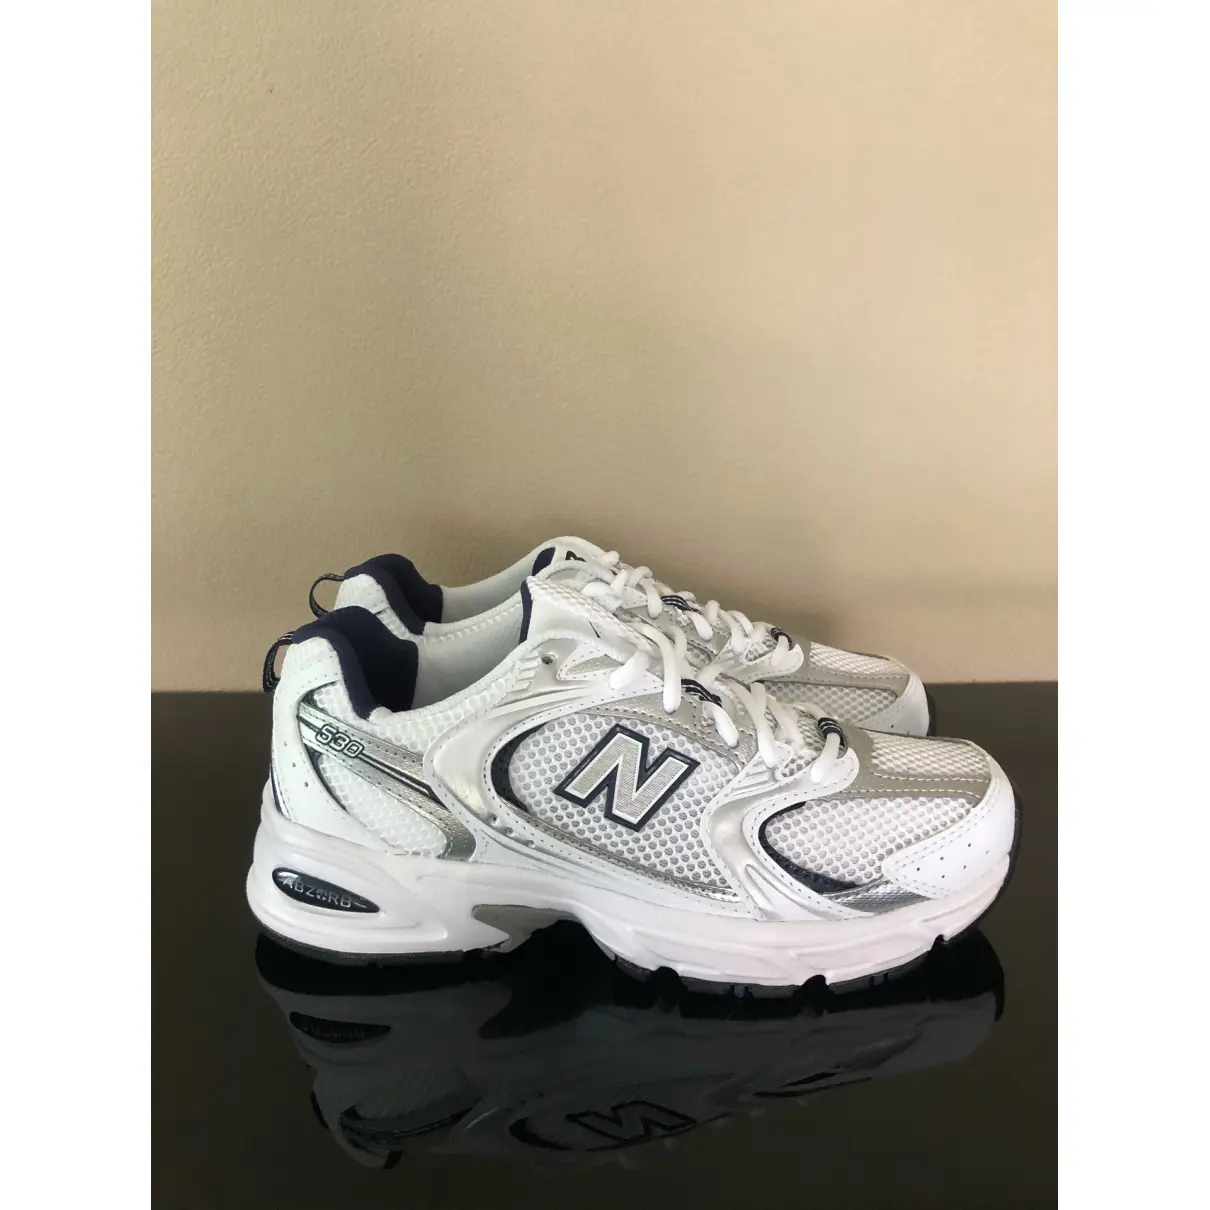 Buy New Balance 530 trainers online